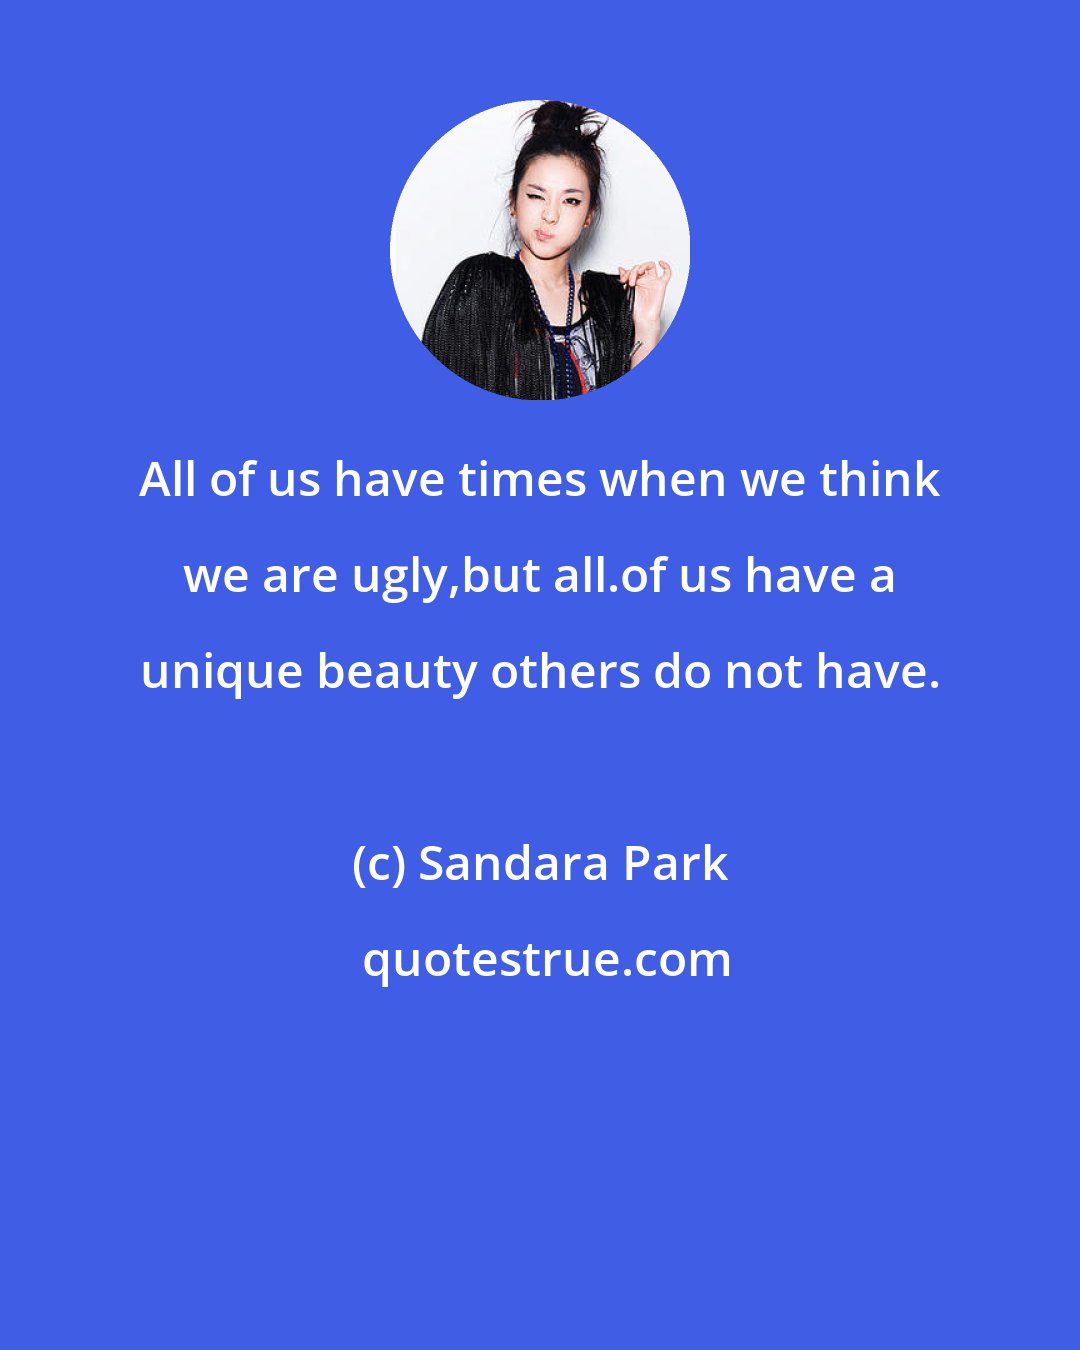 Sandara Park: All of us have times when we think we are ugly,but all.of us have a unique beauty others do not have.